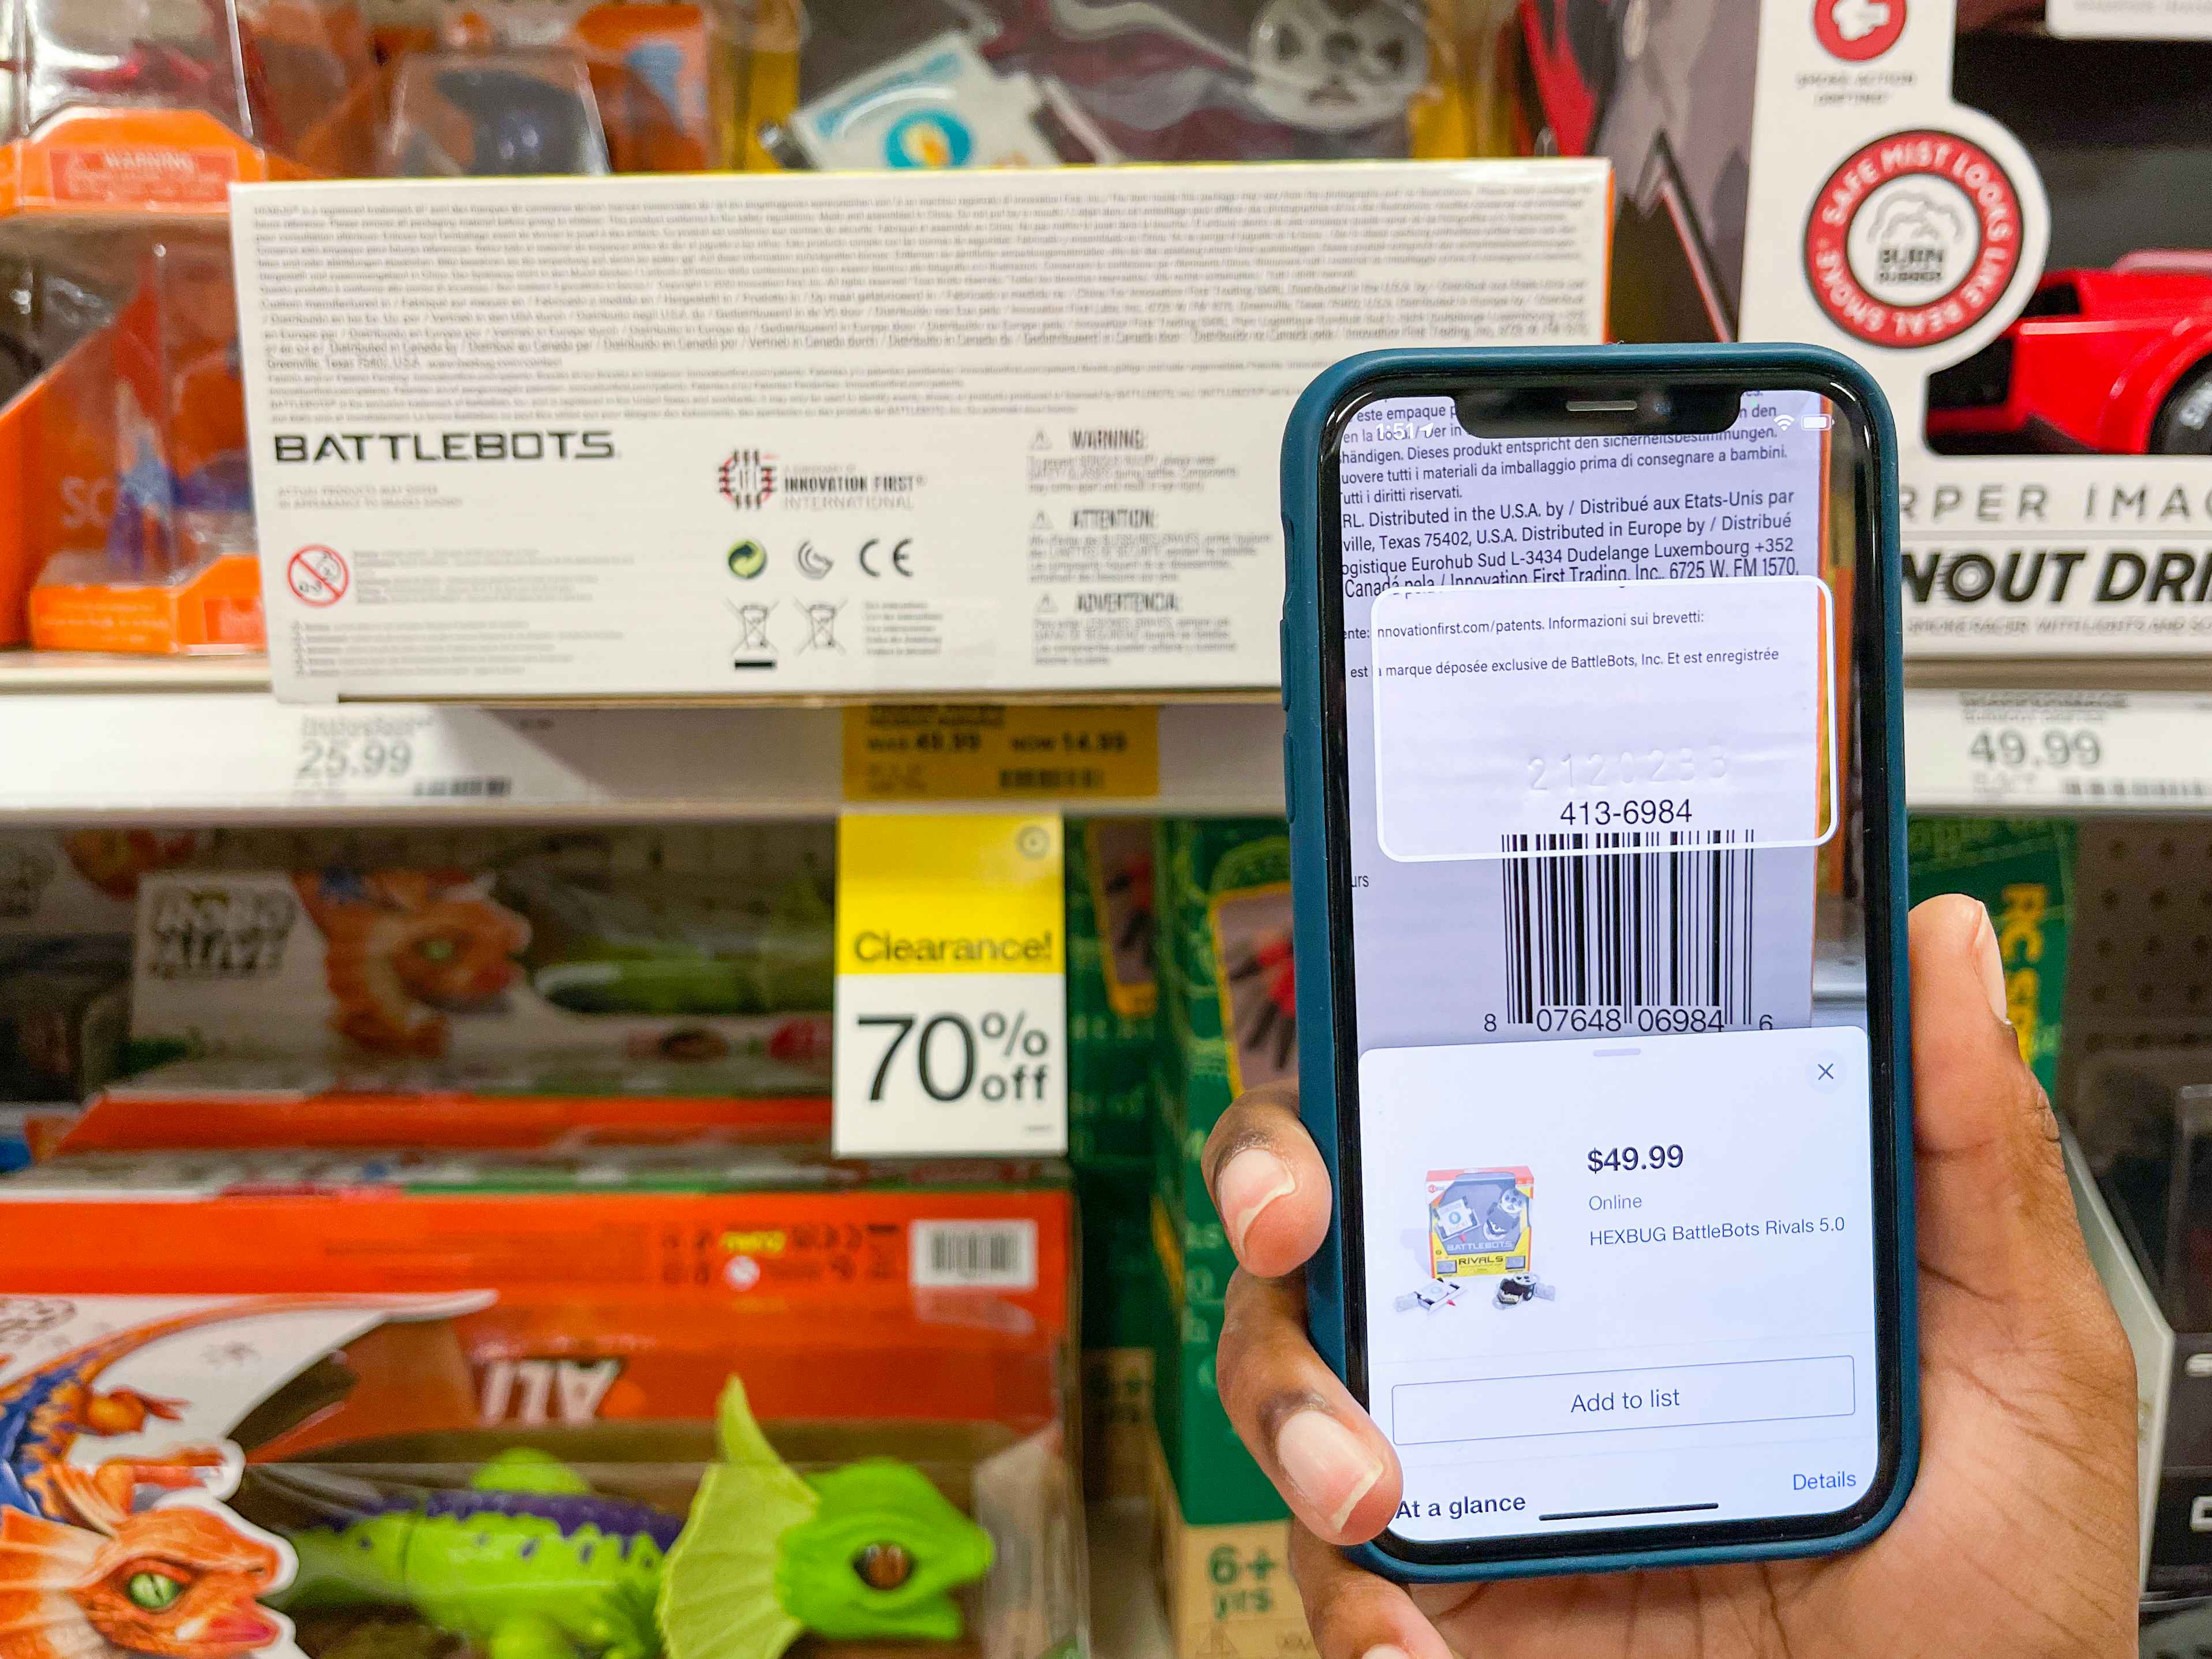 A person's hand holding up an iPhone and scanning a clearance toy's barcode with the Target app.